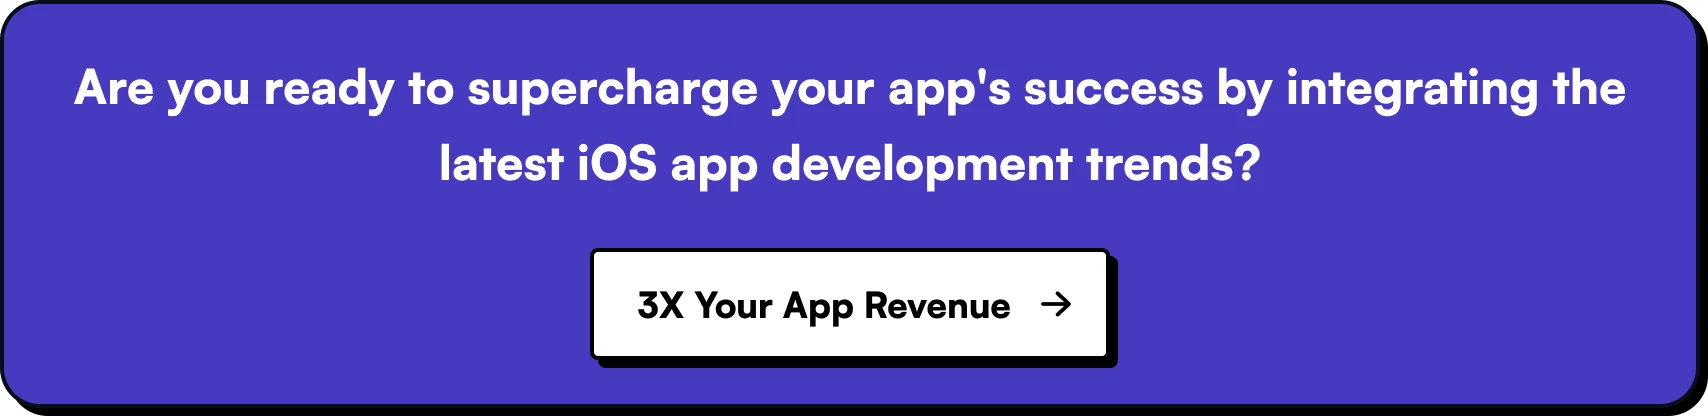 Are you ready to supercharge your app's success by integrating the latest iOS app development trends